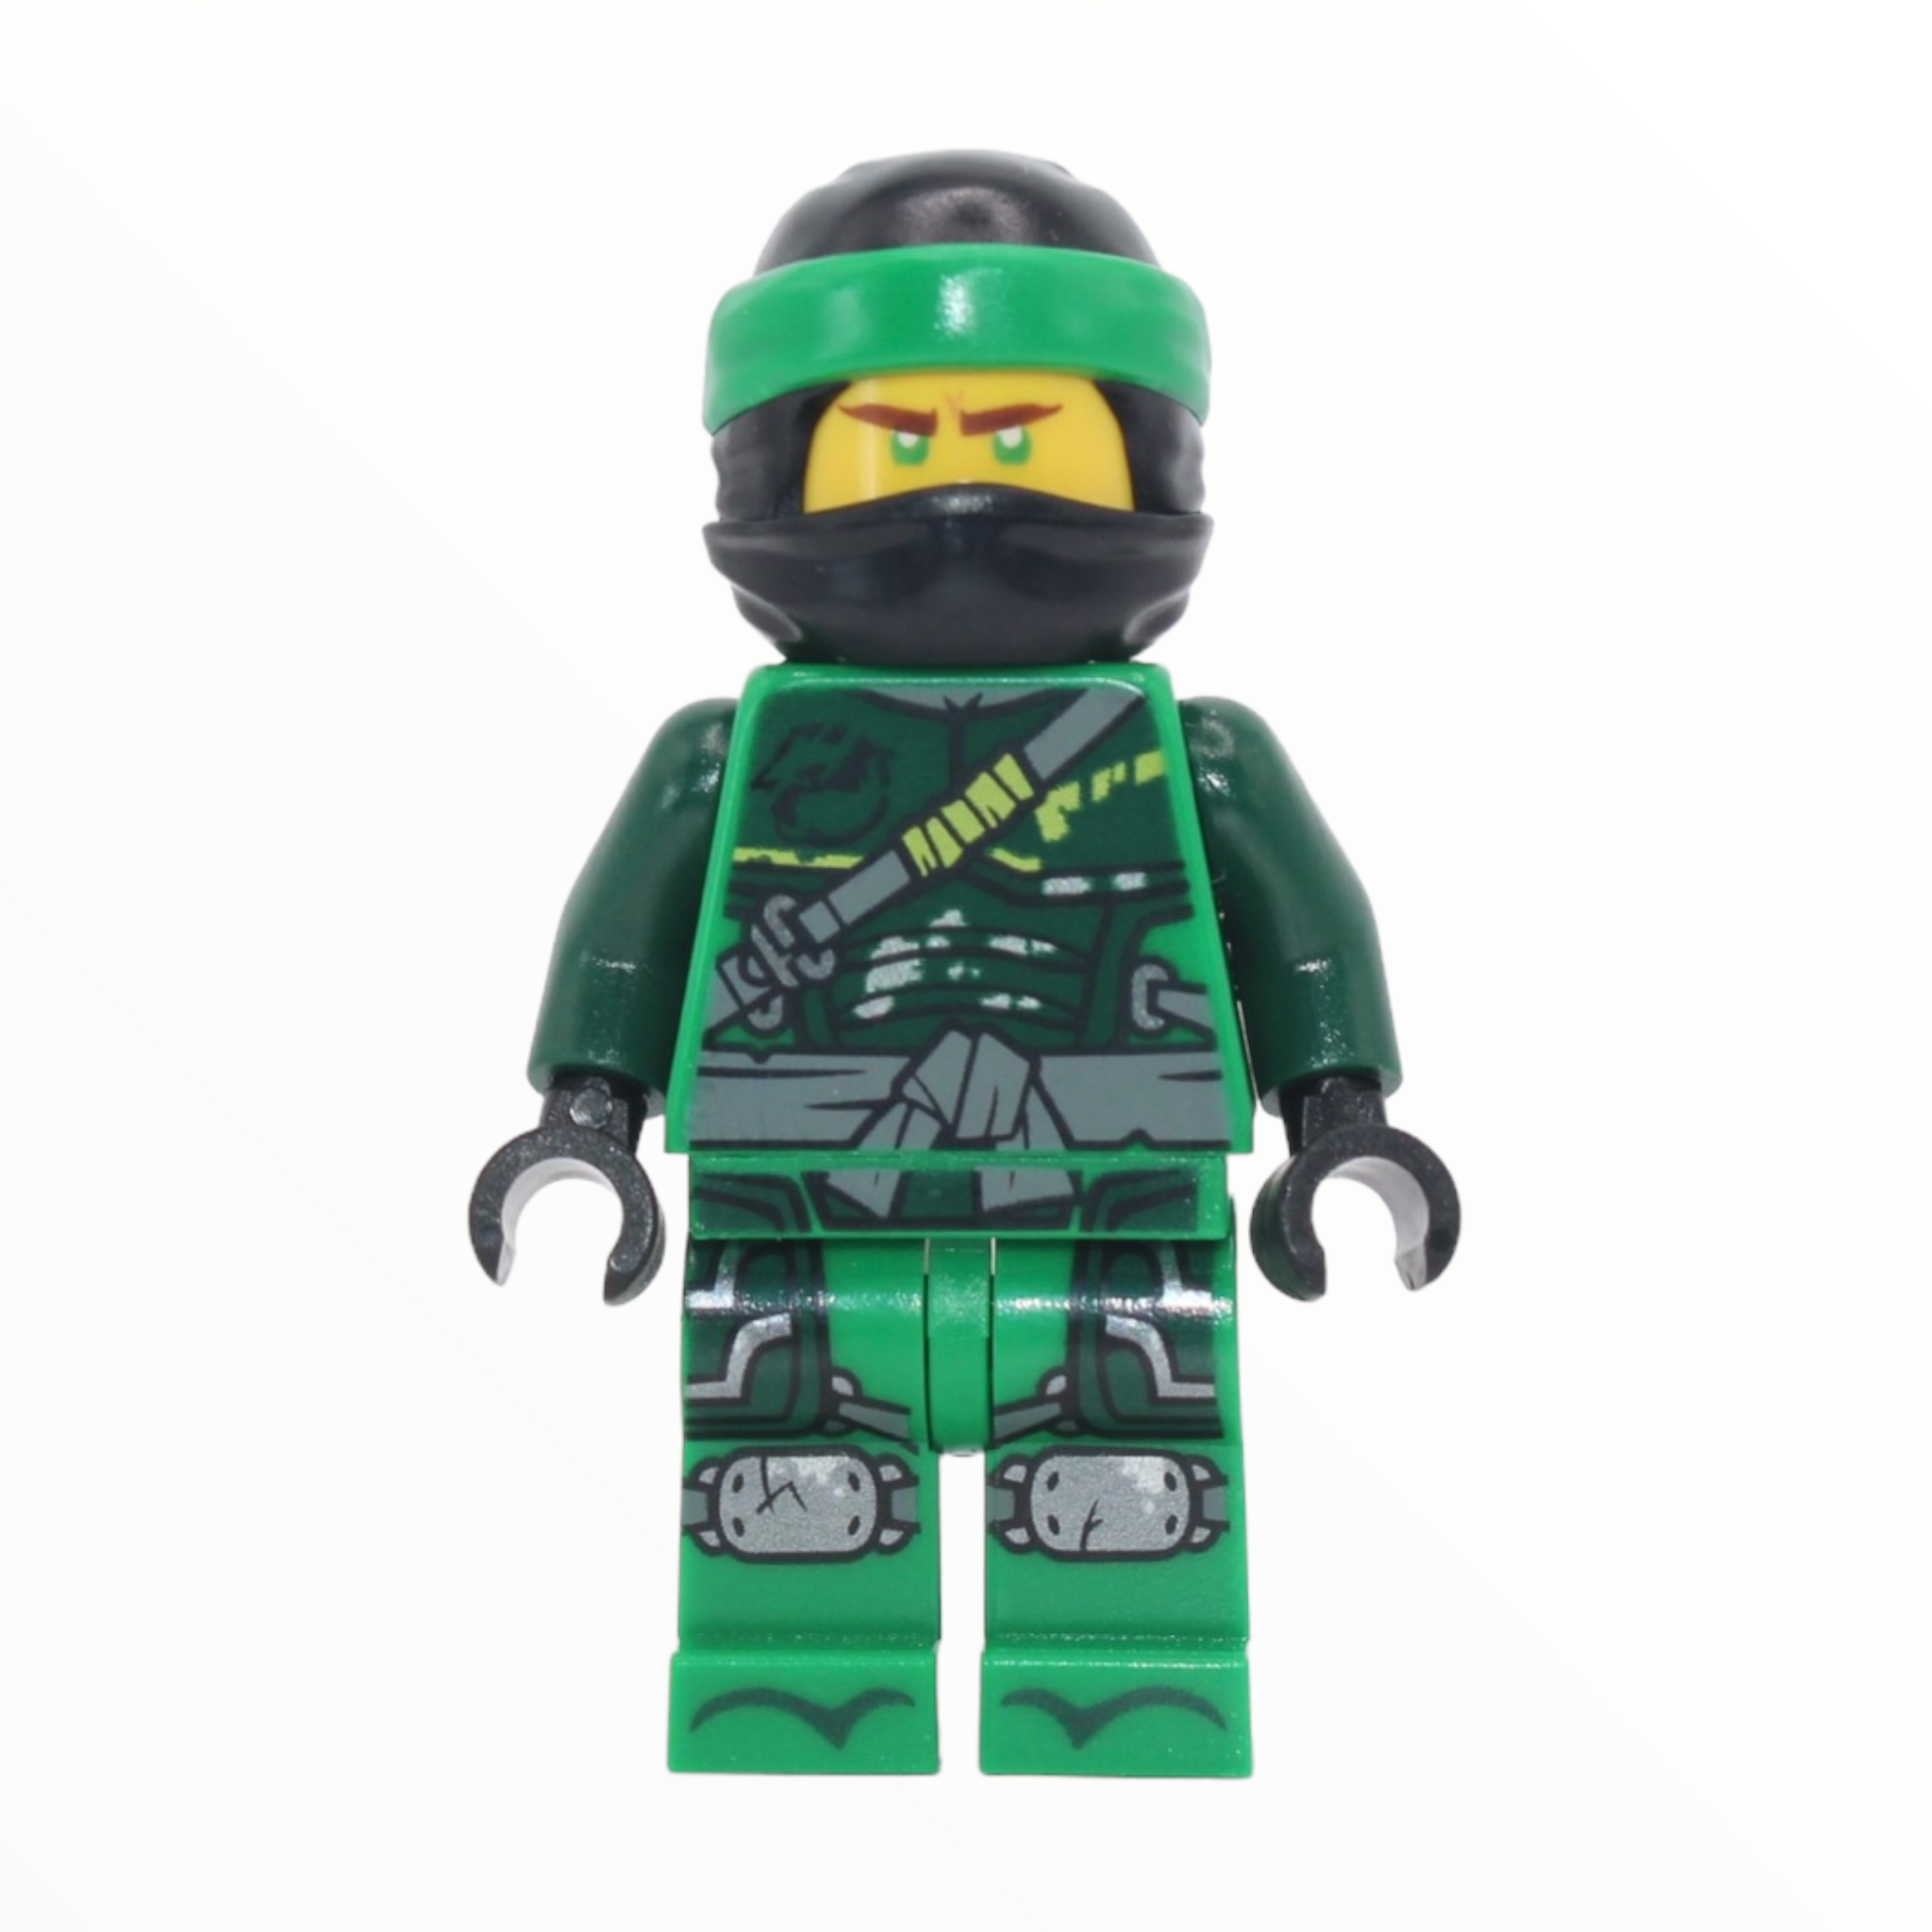 Lloyd (Hunted, green wrap without Asian symbol)